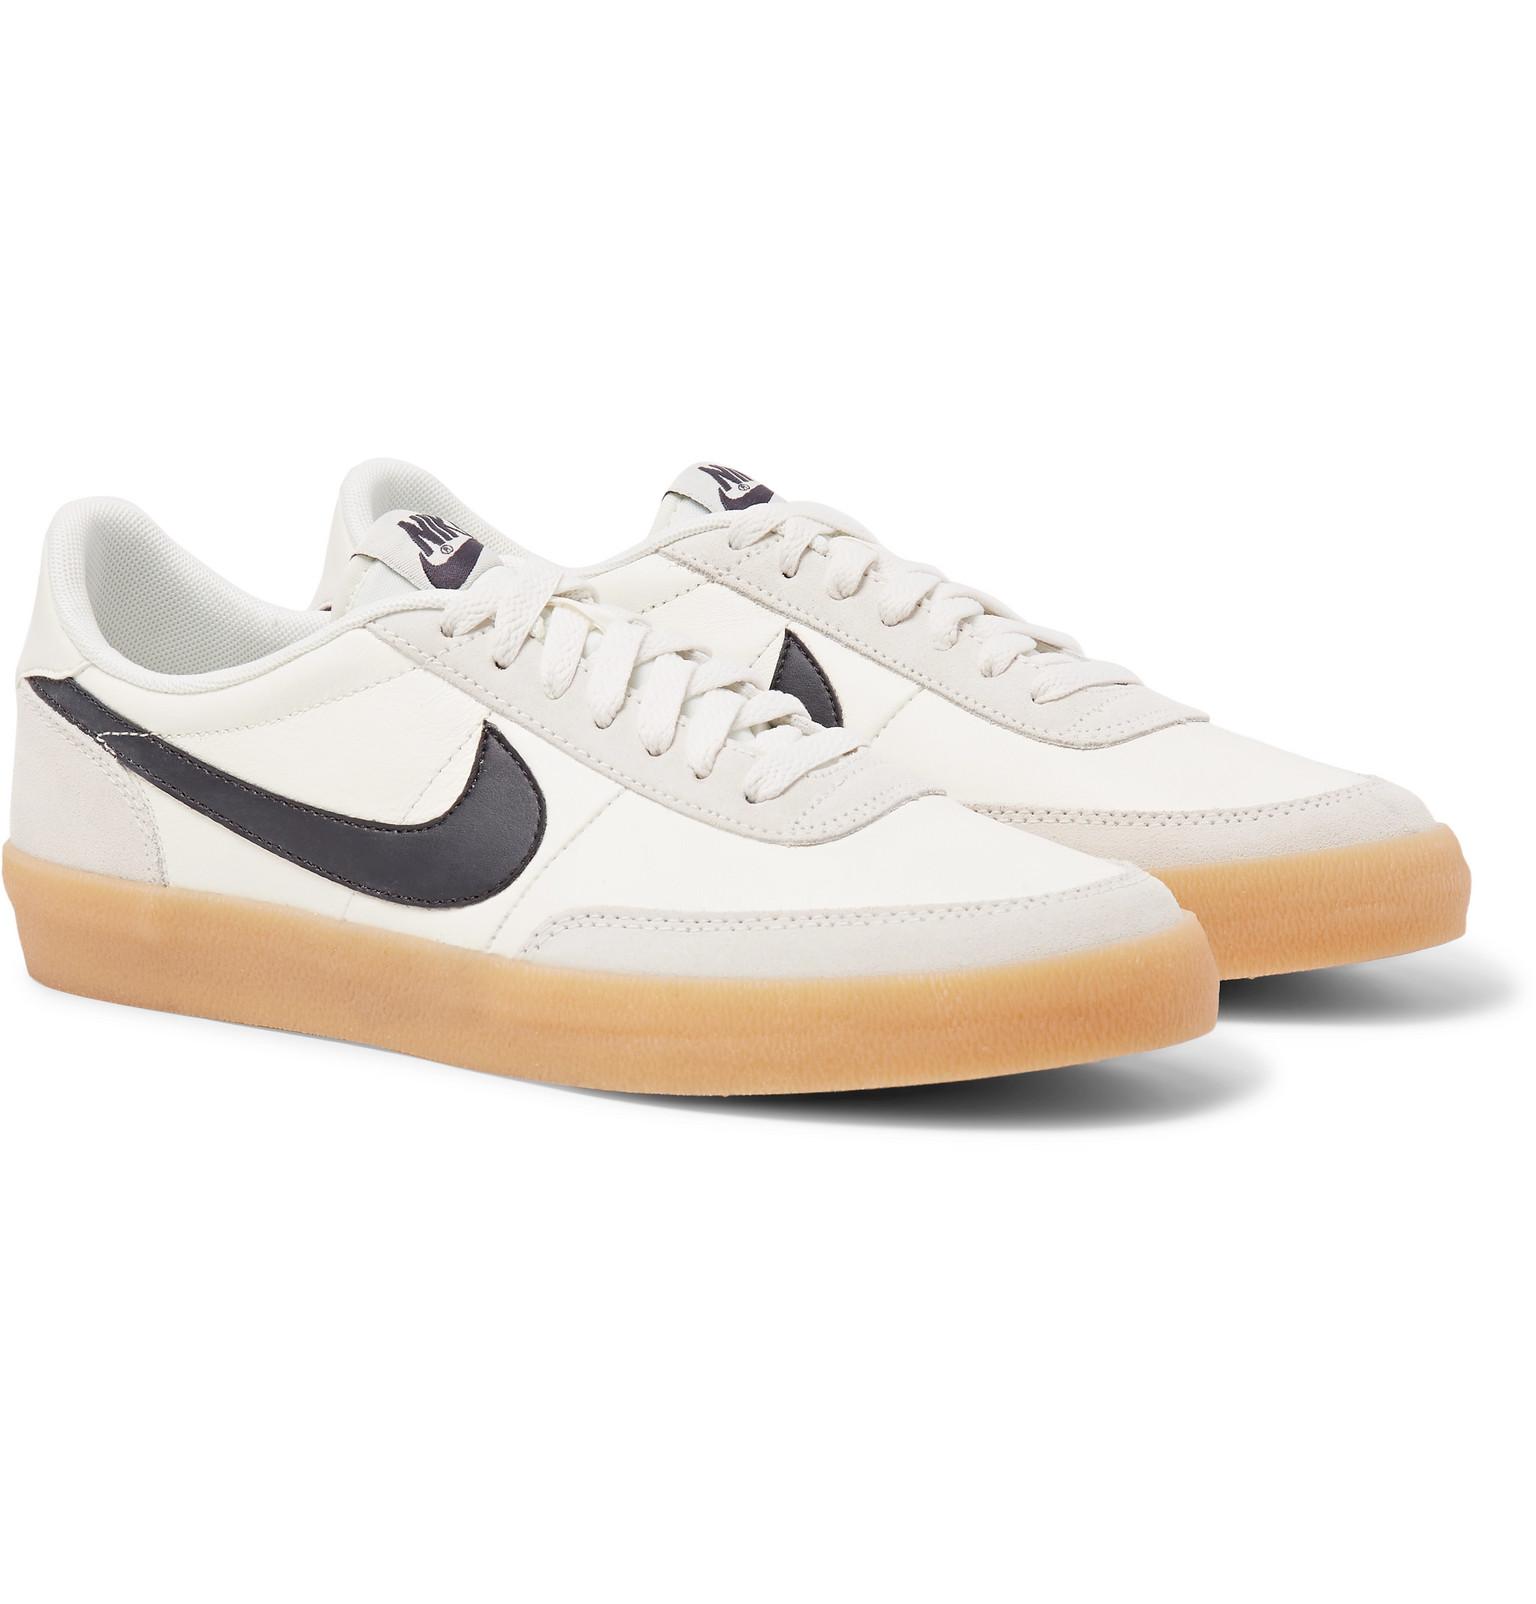 Nike Killshot 2 Leather And Suede Sneakers in White for Men - Lyst